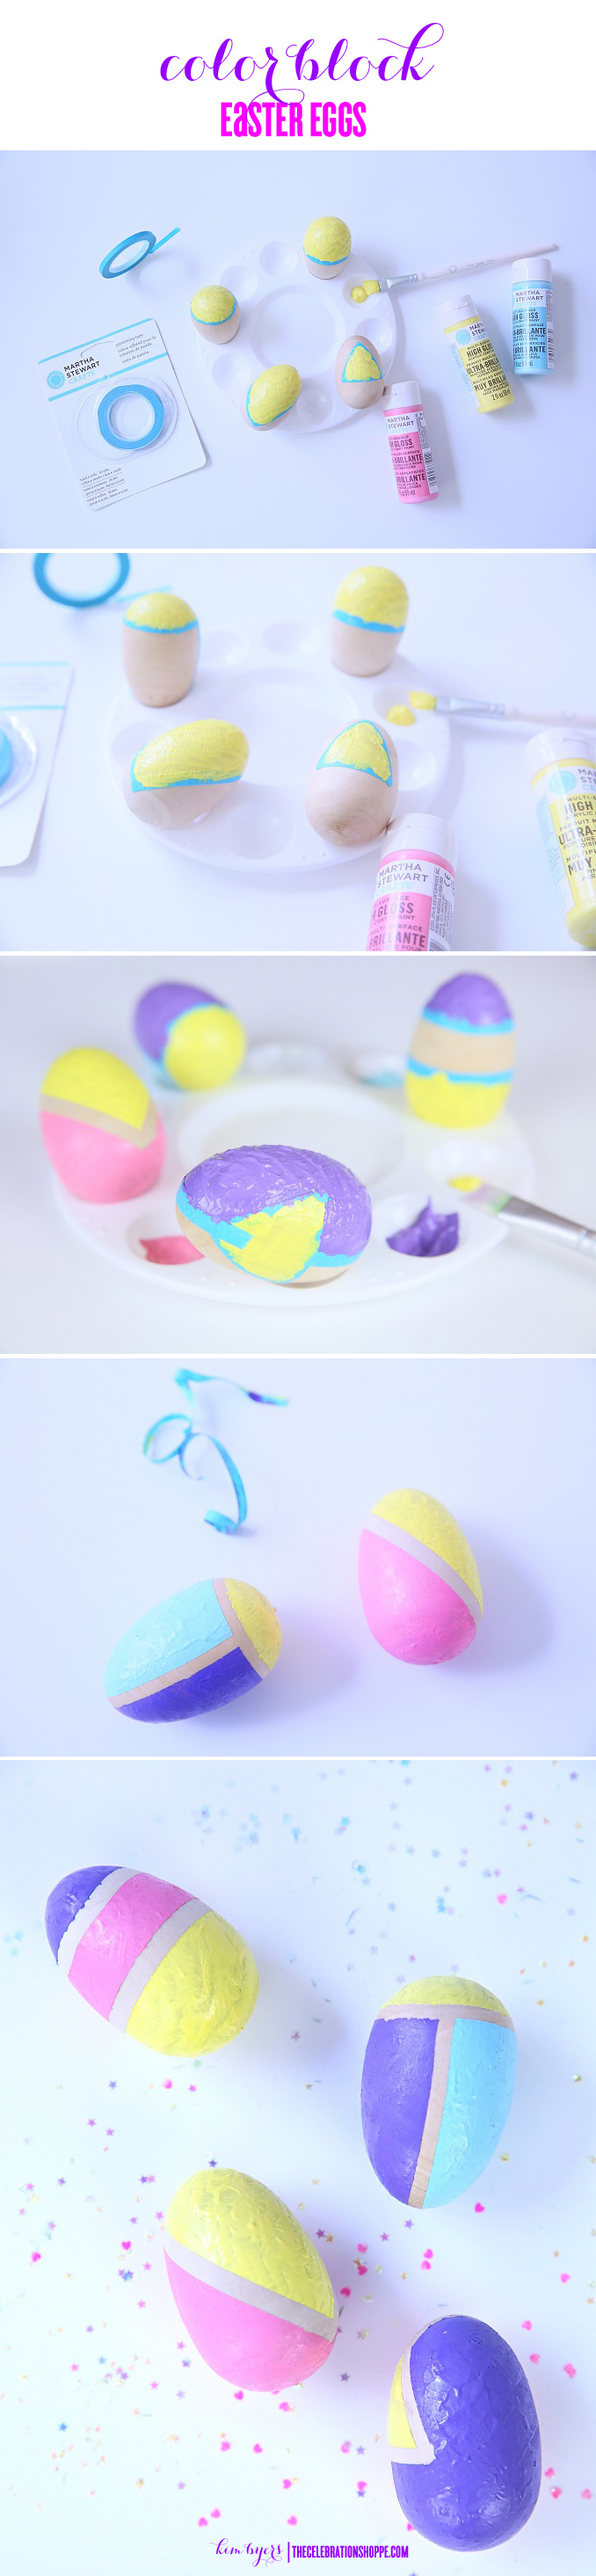 Easter Egg Painting Ideas | Kim Byers